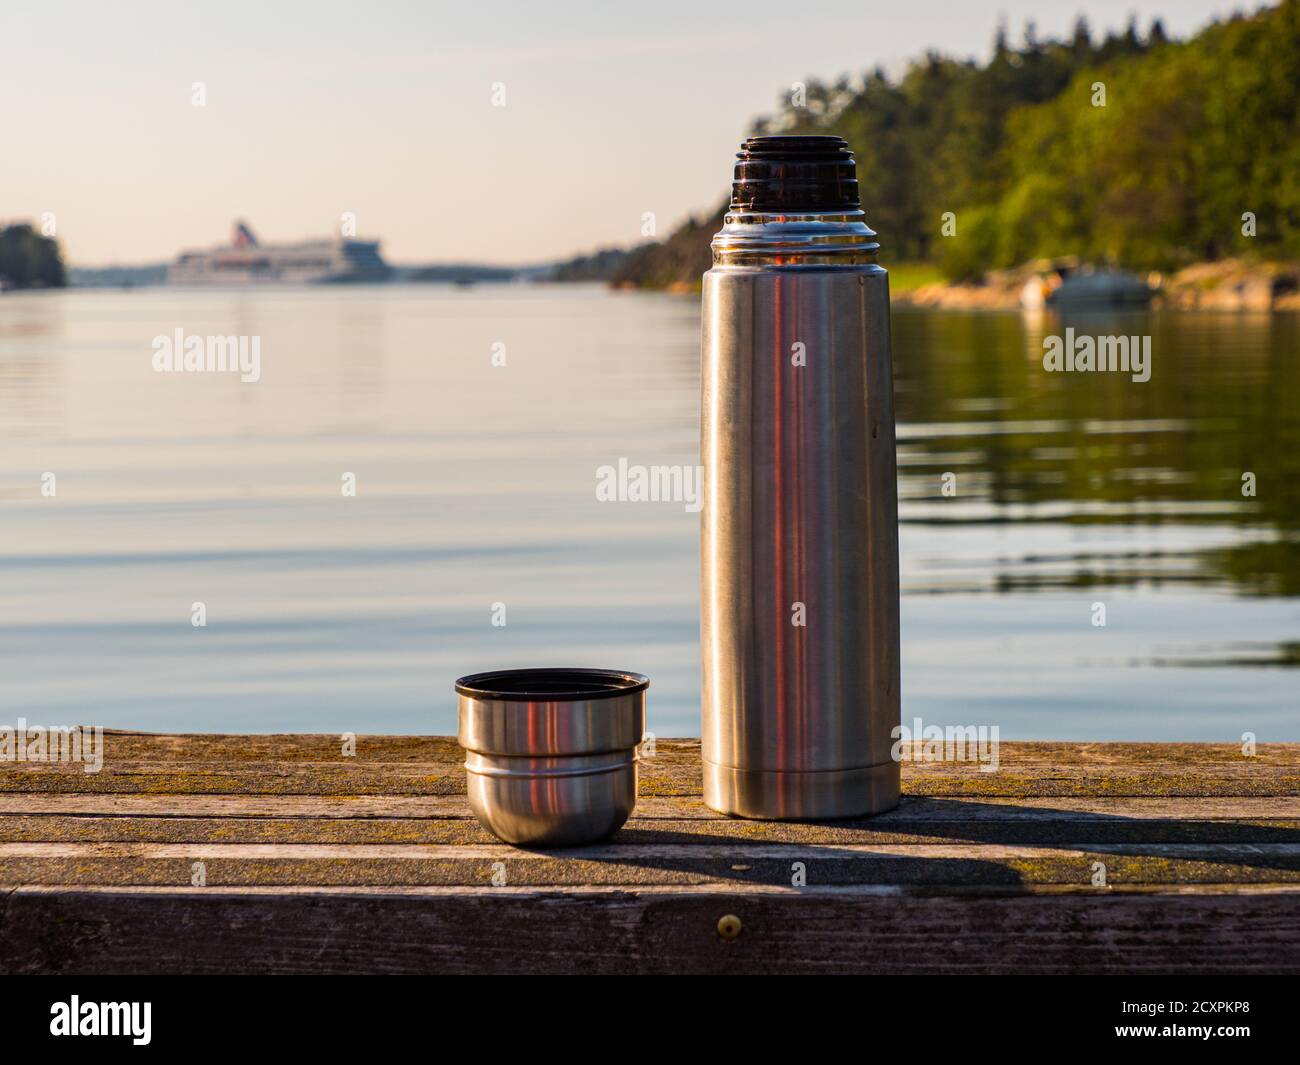 https://c8.alamy.com/comp/2CXPKP8/a-thermos-with-tea-on-a-wooden-bench-with-a-view-of-the-fjord-and-a-sailing-ship-in-the-baltic-sea-in-the-background-2CXPKP8.jpg